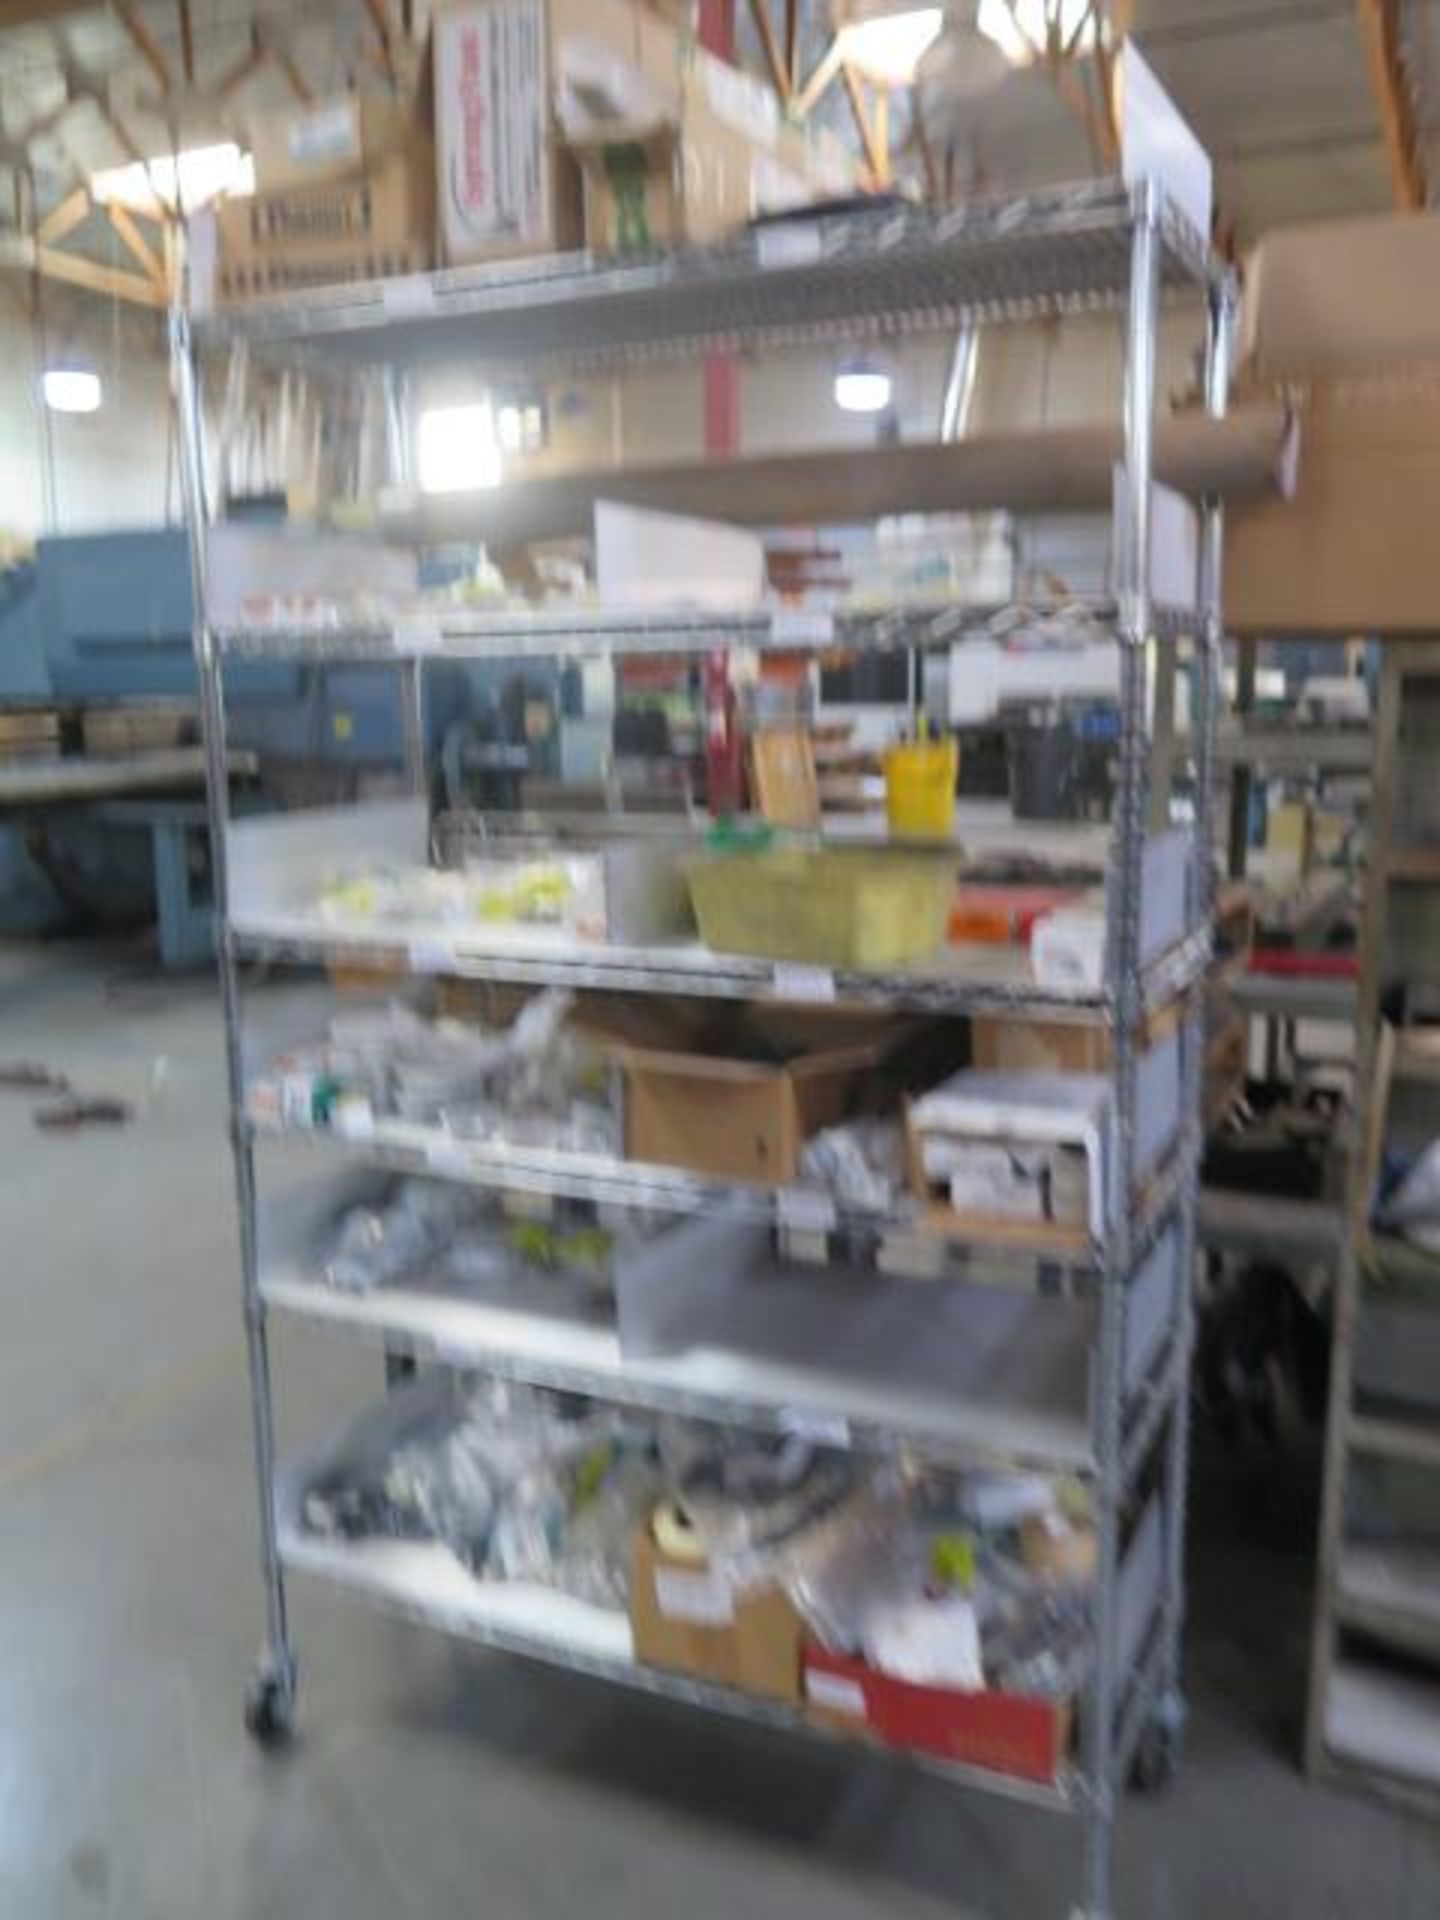 Large Quantity of Insertion Hardware w/ Shelves and Carts (SOLD AS-IS - NO WARRANTY) - Image 4 of 12